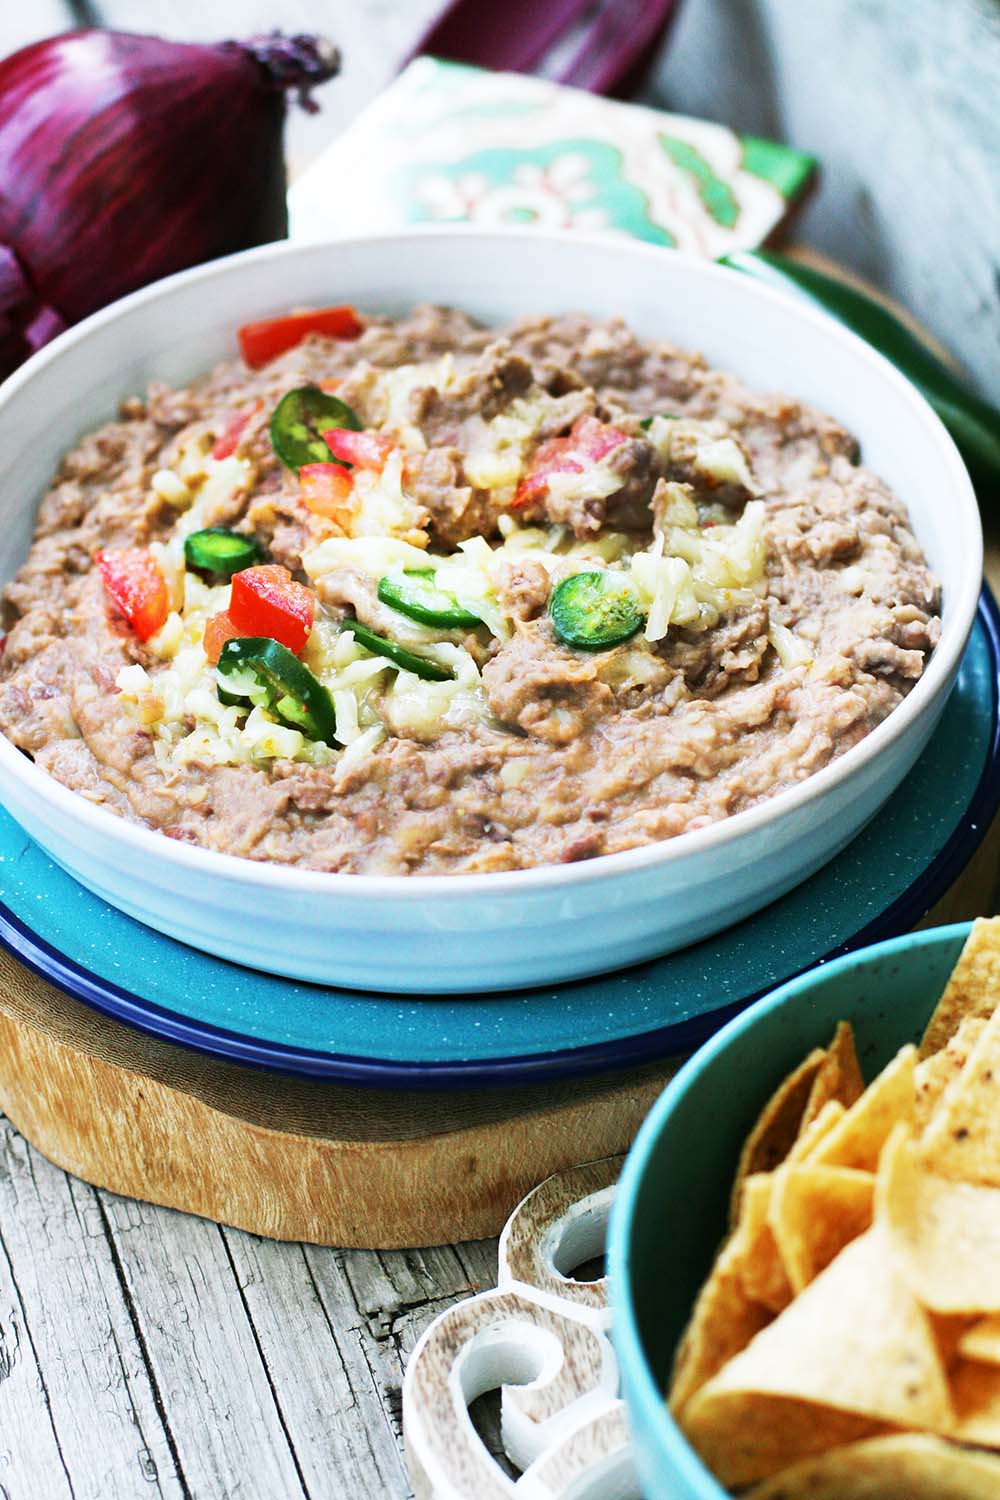 Learn how to make homemade refried beans from scratch: save money and eat great Mexican food at home!